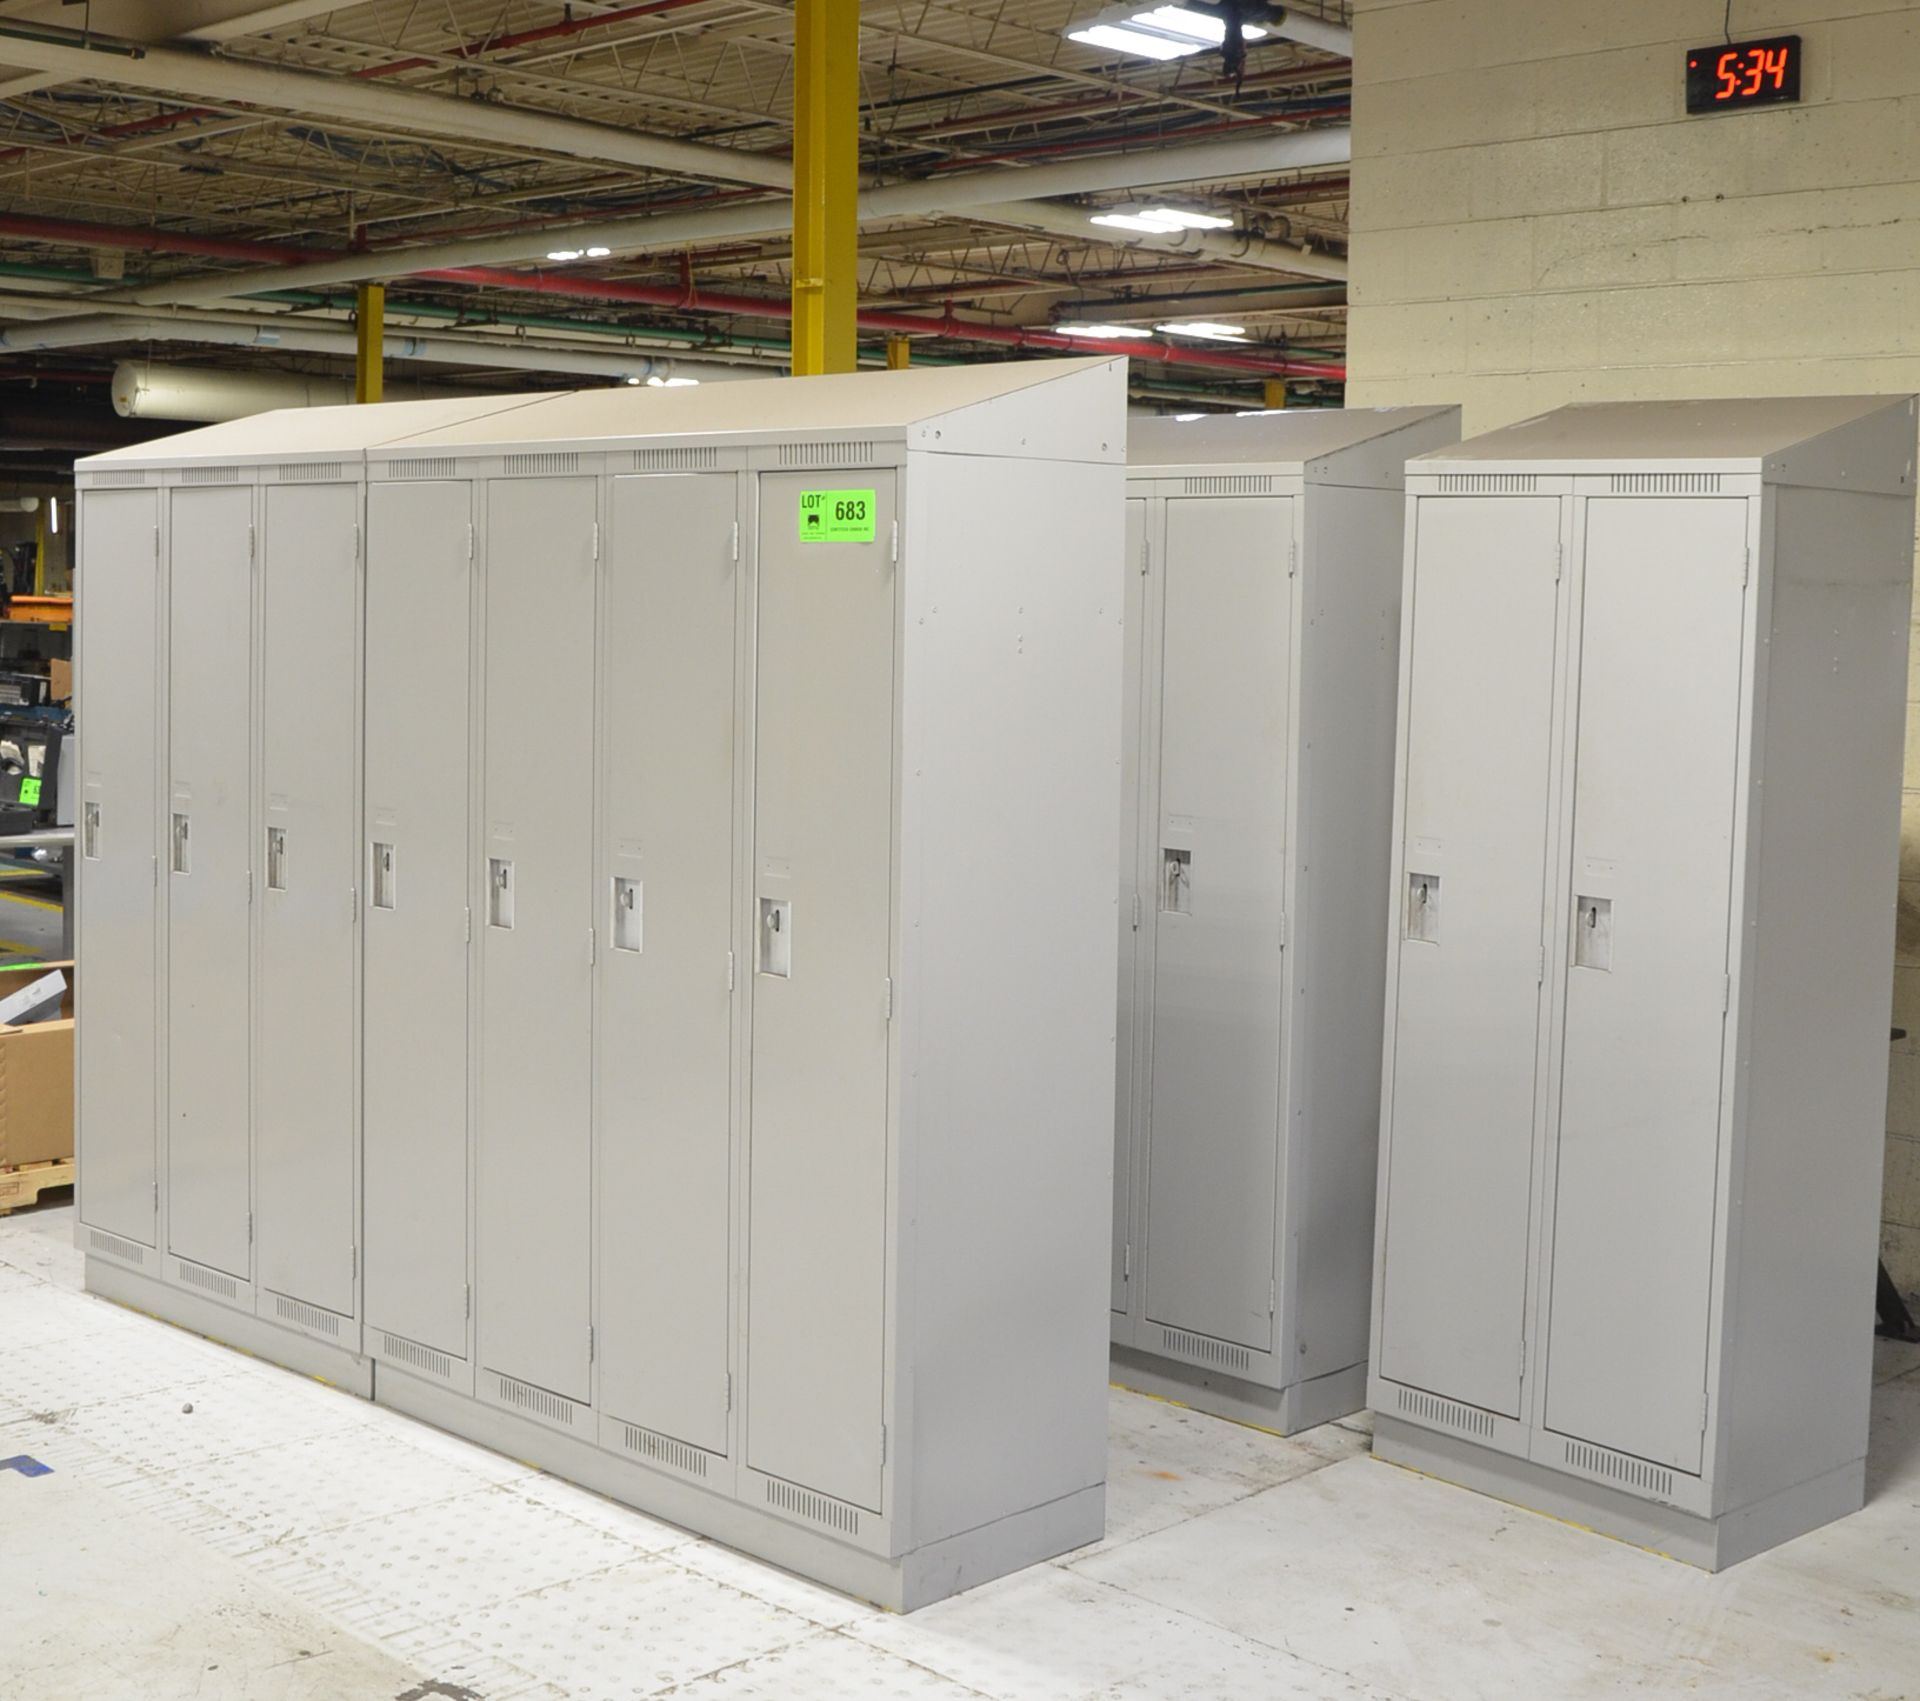 LOT/ LOCKERS [RIGGING FEE FOR LOT #683 - $tbd USD PLUS APPLICABLE TAXES]